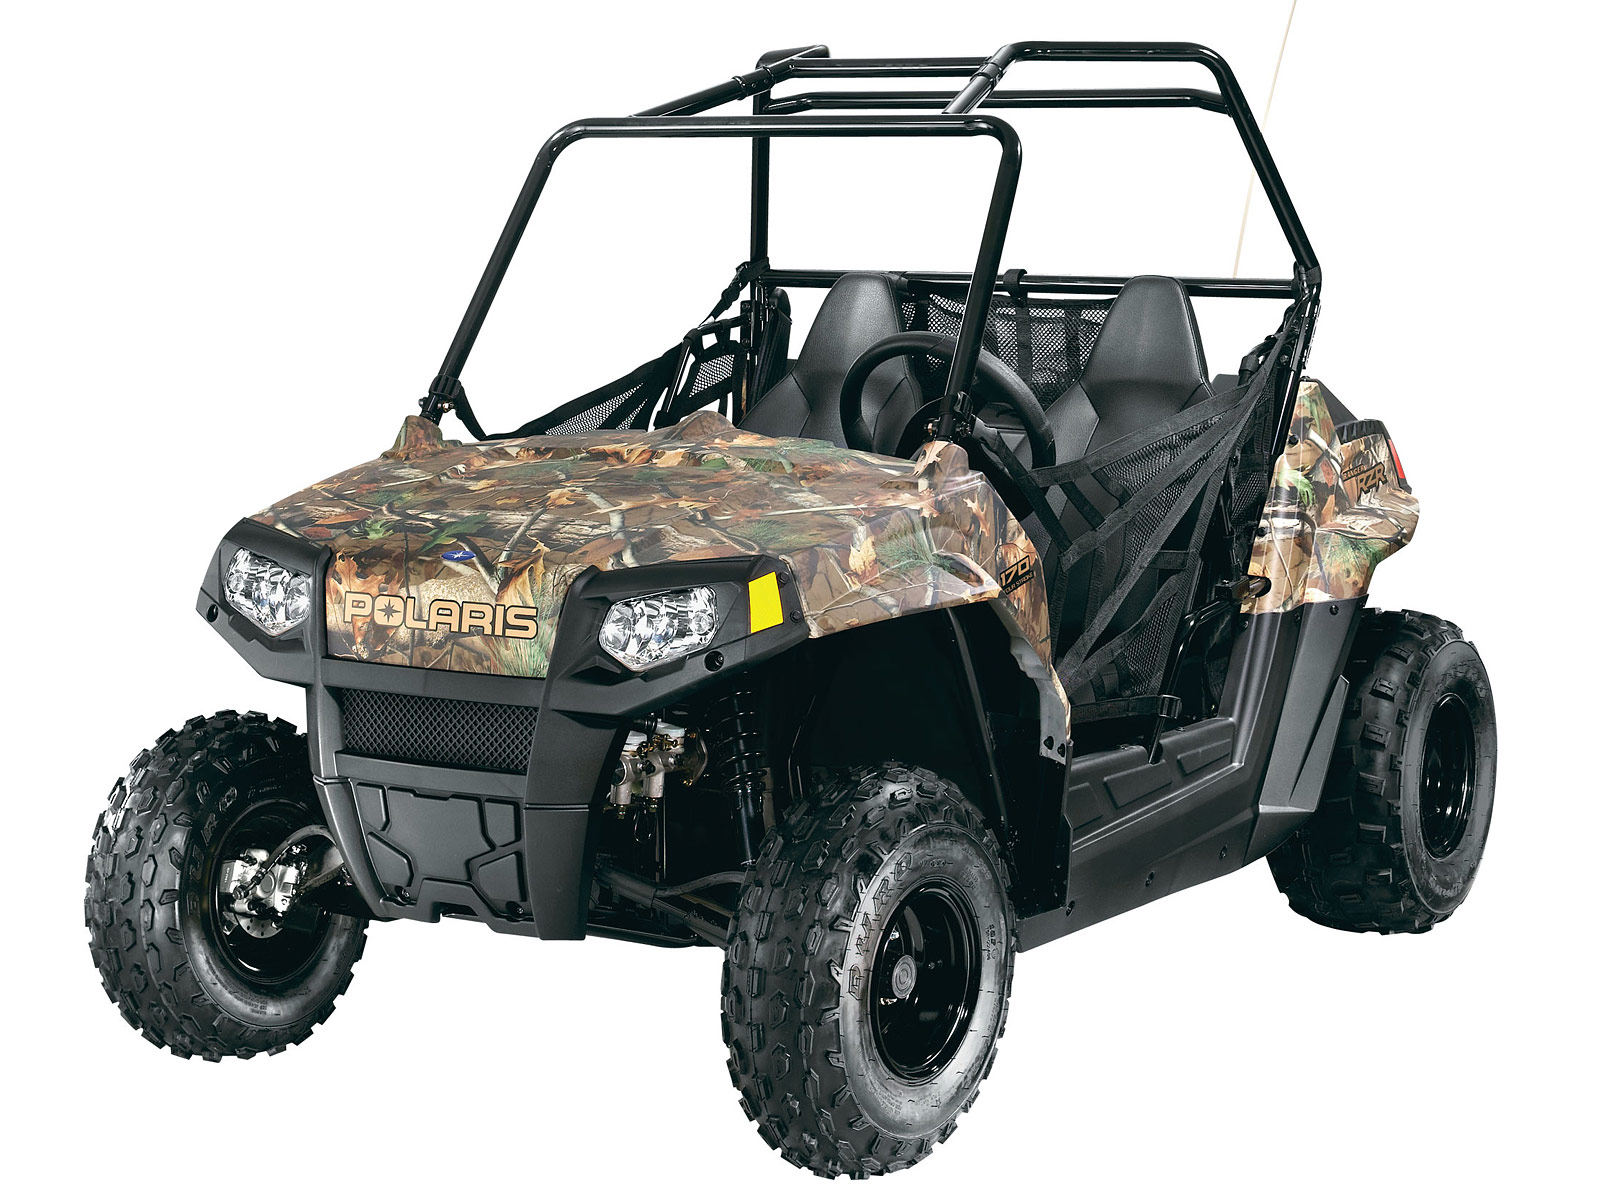 Polaris Ranger Rzr Re World S Only Youth